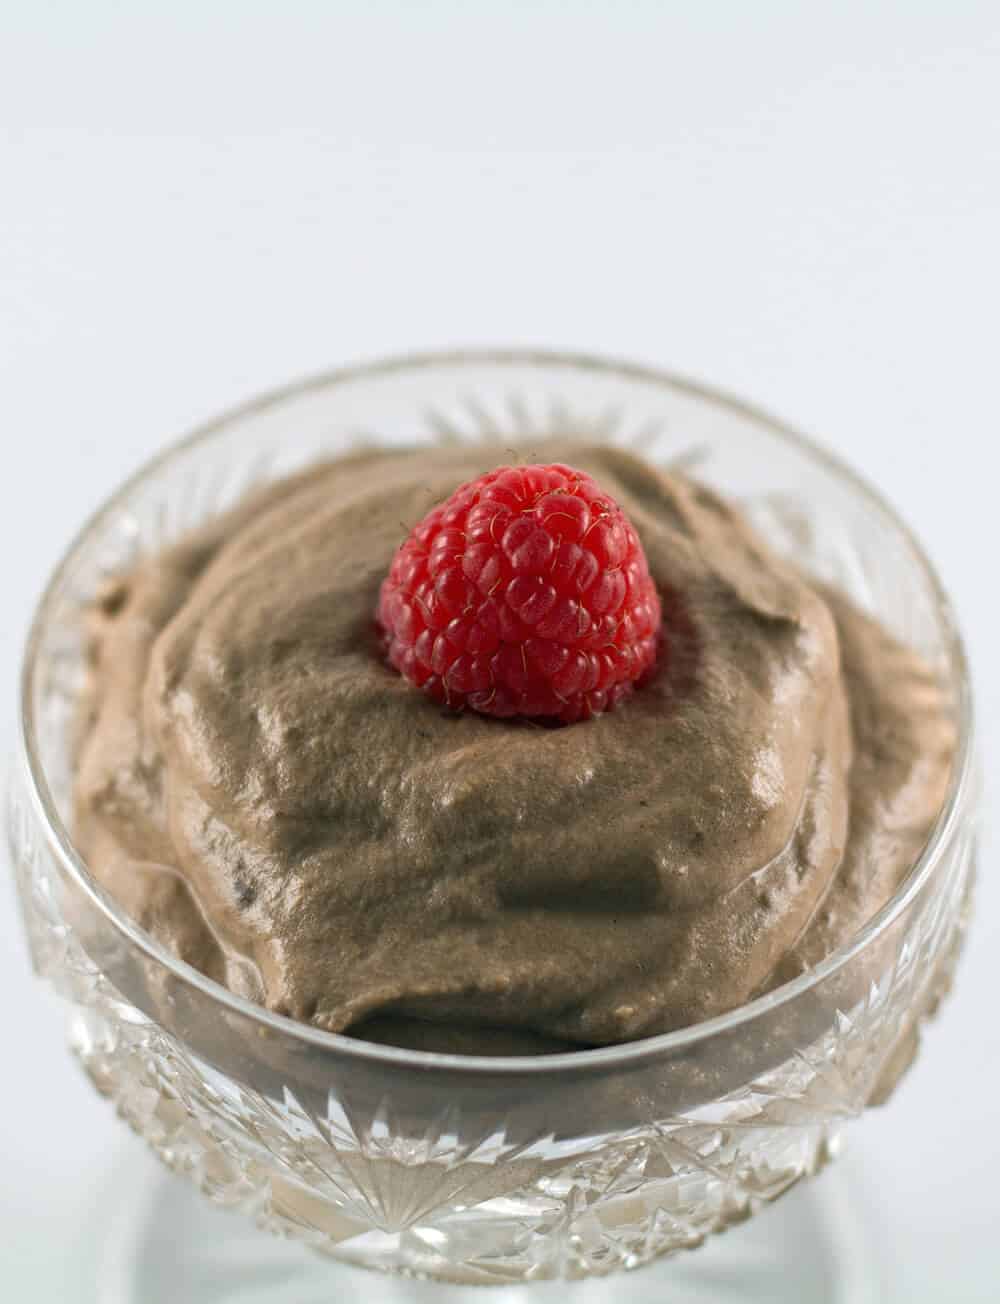 Creamy chocolate mousse is an elegant Valentine's Day (or any day) dessert